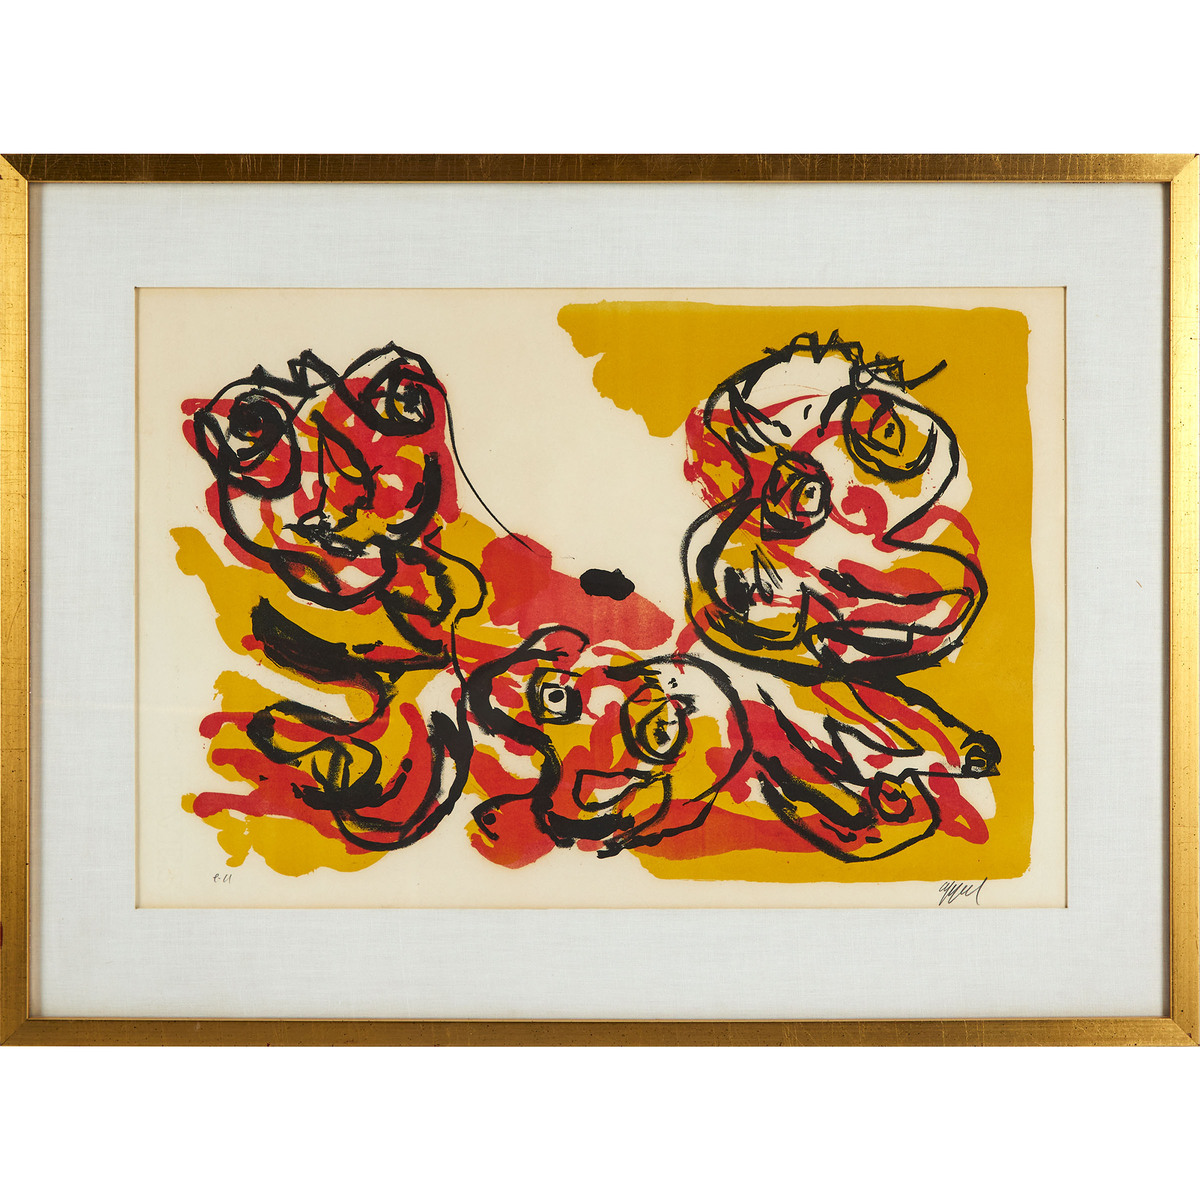 Karel Appel (1921-2006), UNTITLED, CA. 1975, signed and editioned "e.a" for artist's proof, aside fr - Image 2 of 3